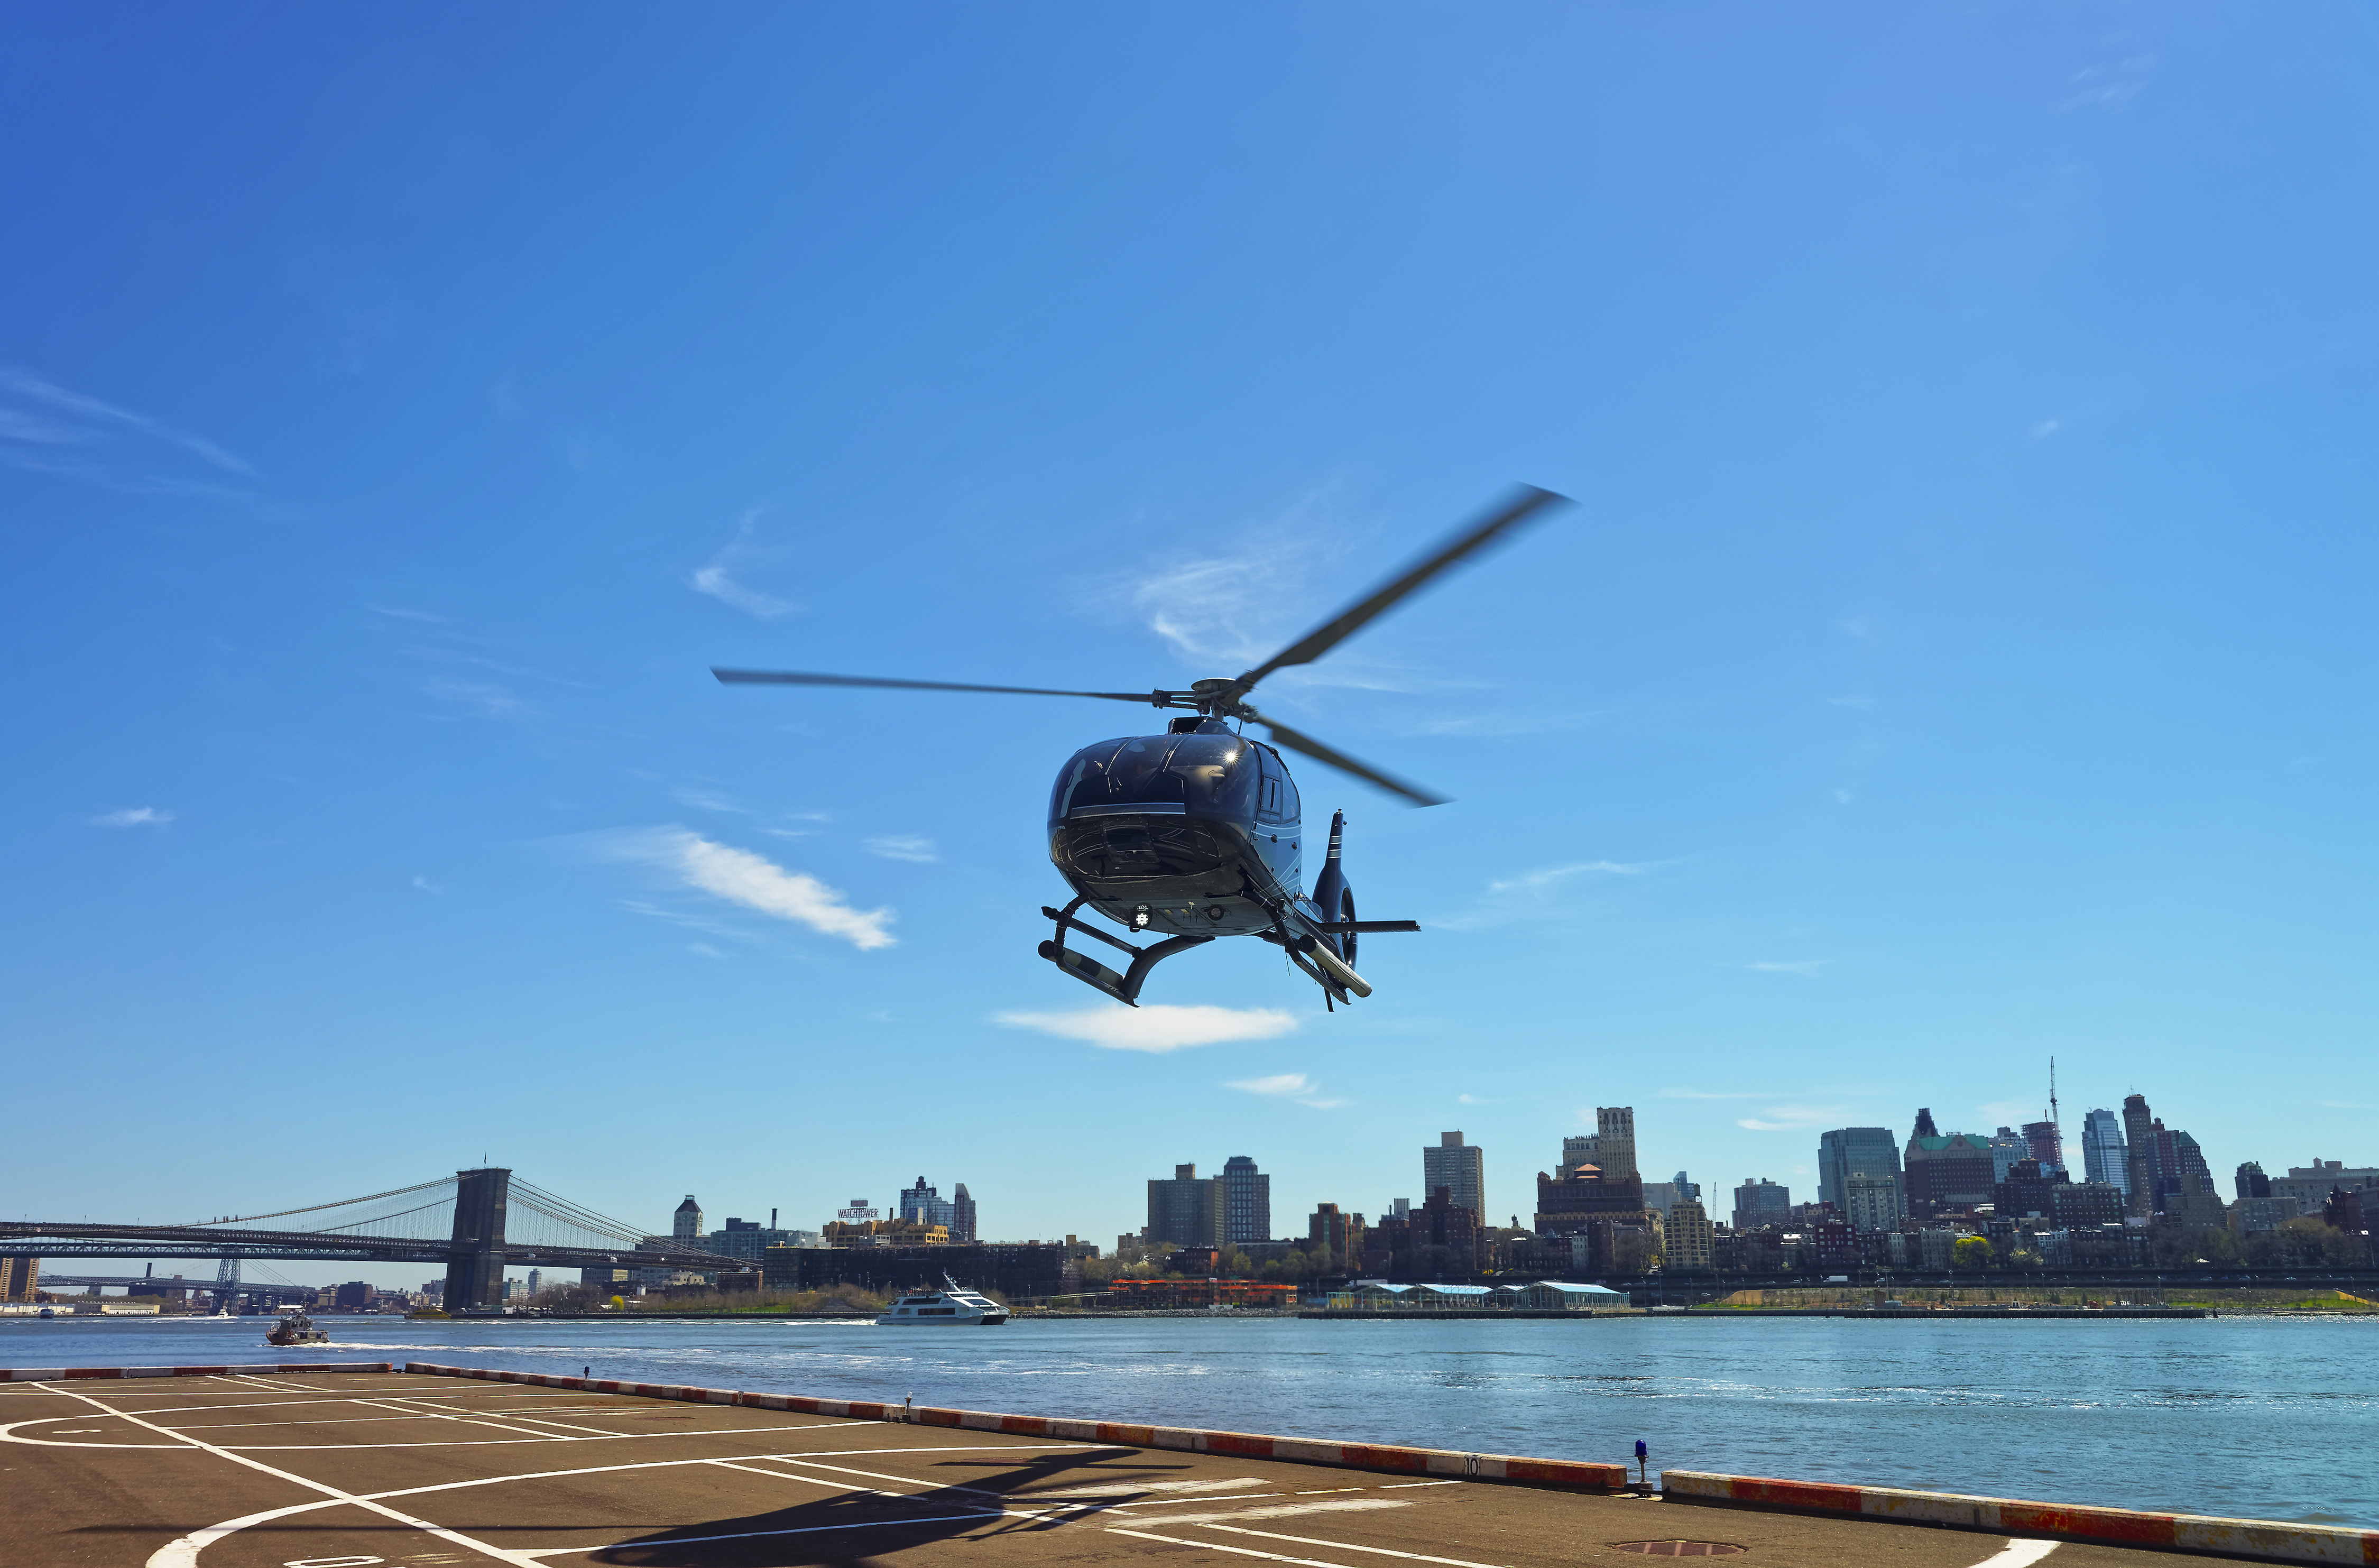 A helicopter landing in a heliport, the Manhattan and Brooklyn skylines behind it.